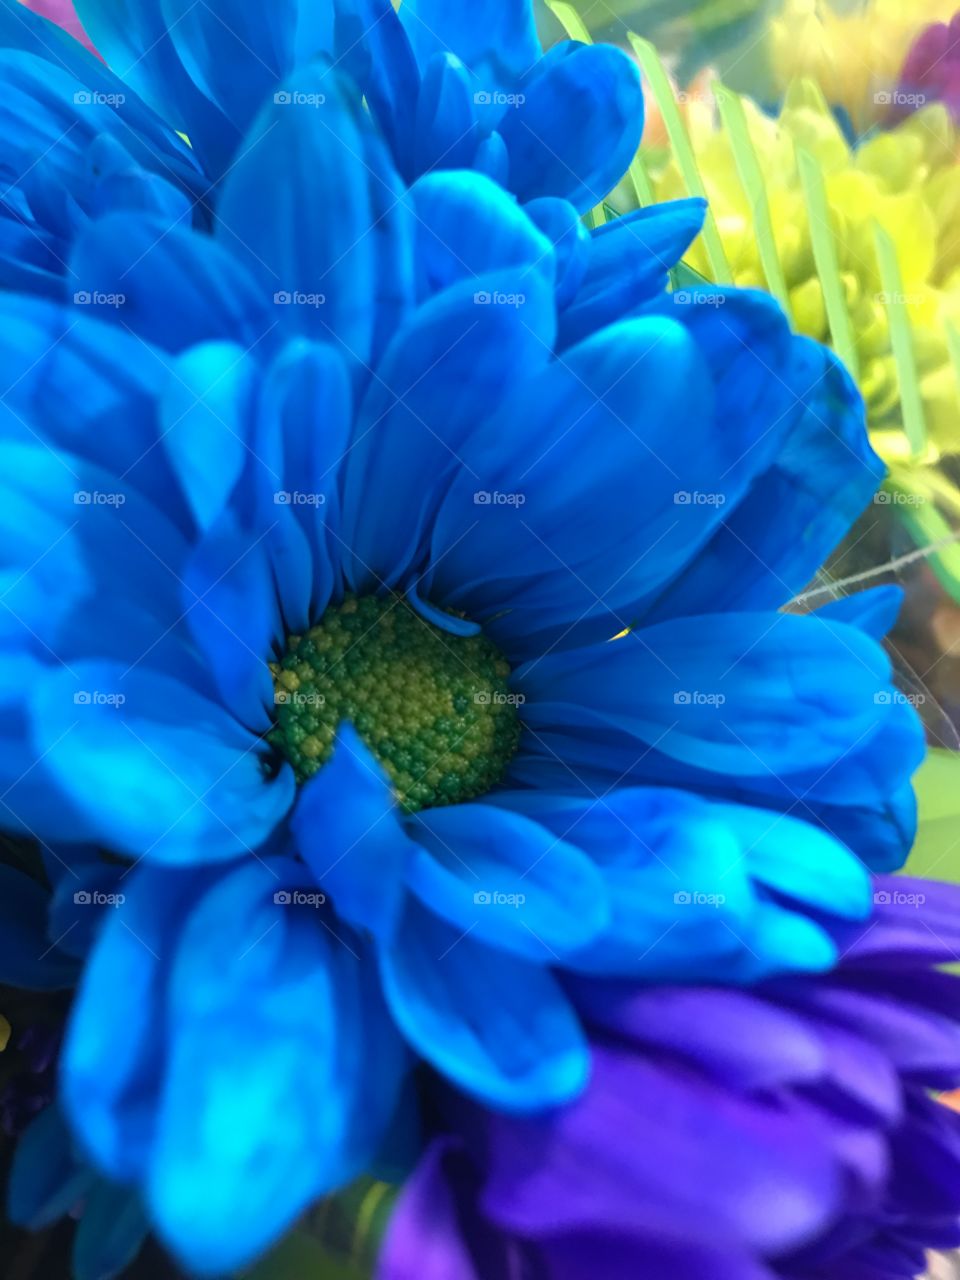 A real blue flower. 